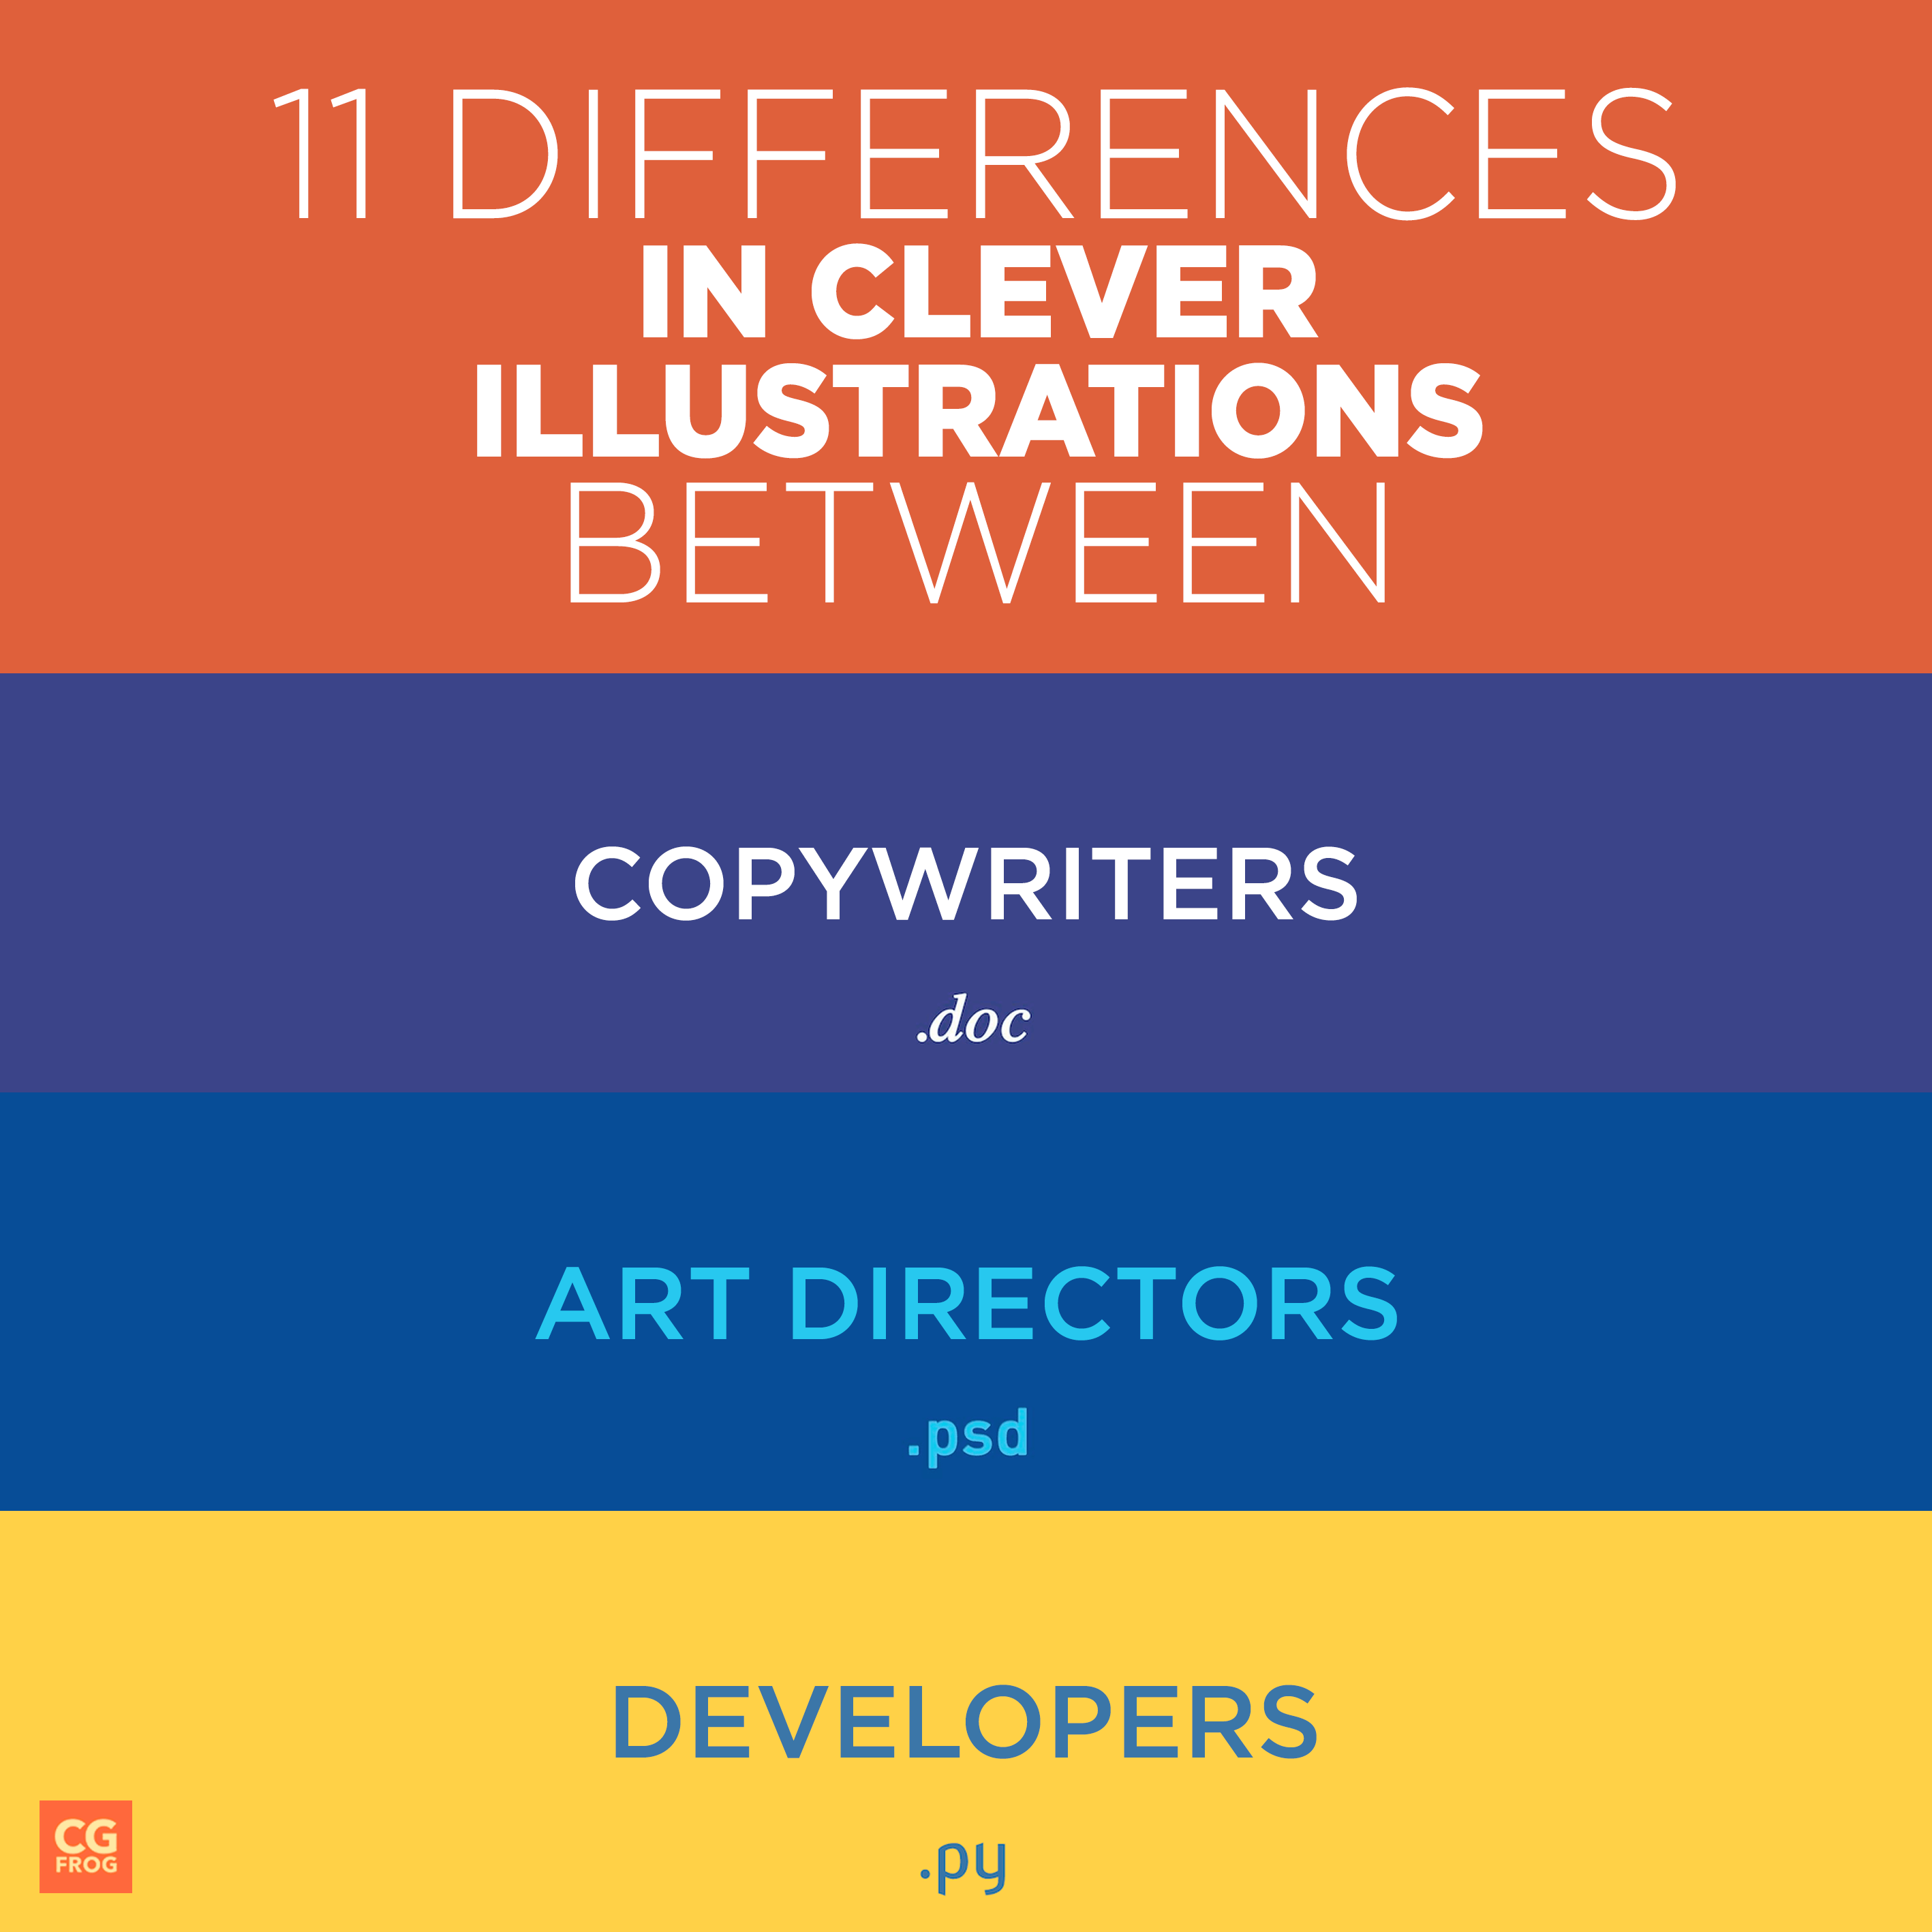 11-Differences-in-Clever-Illustrations-Between-Copywriters,-Art-Directors-and-Developers